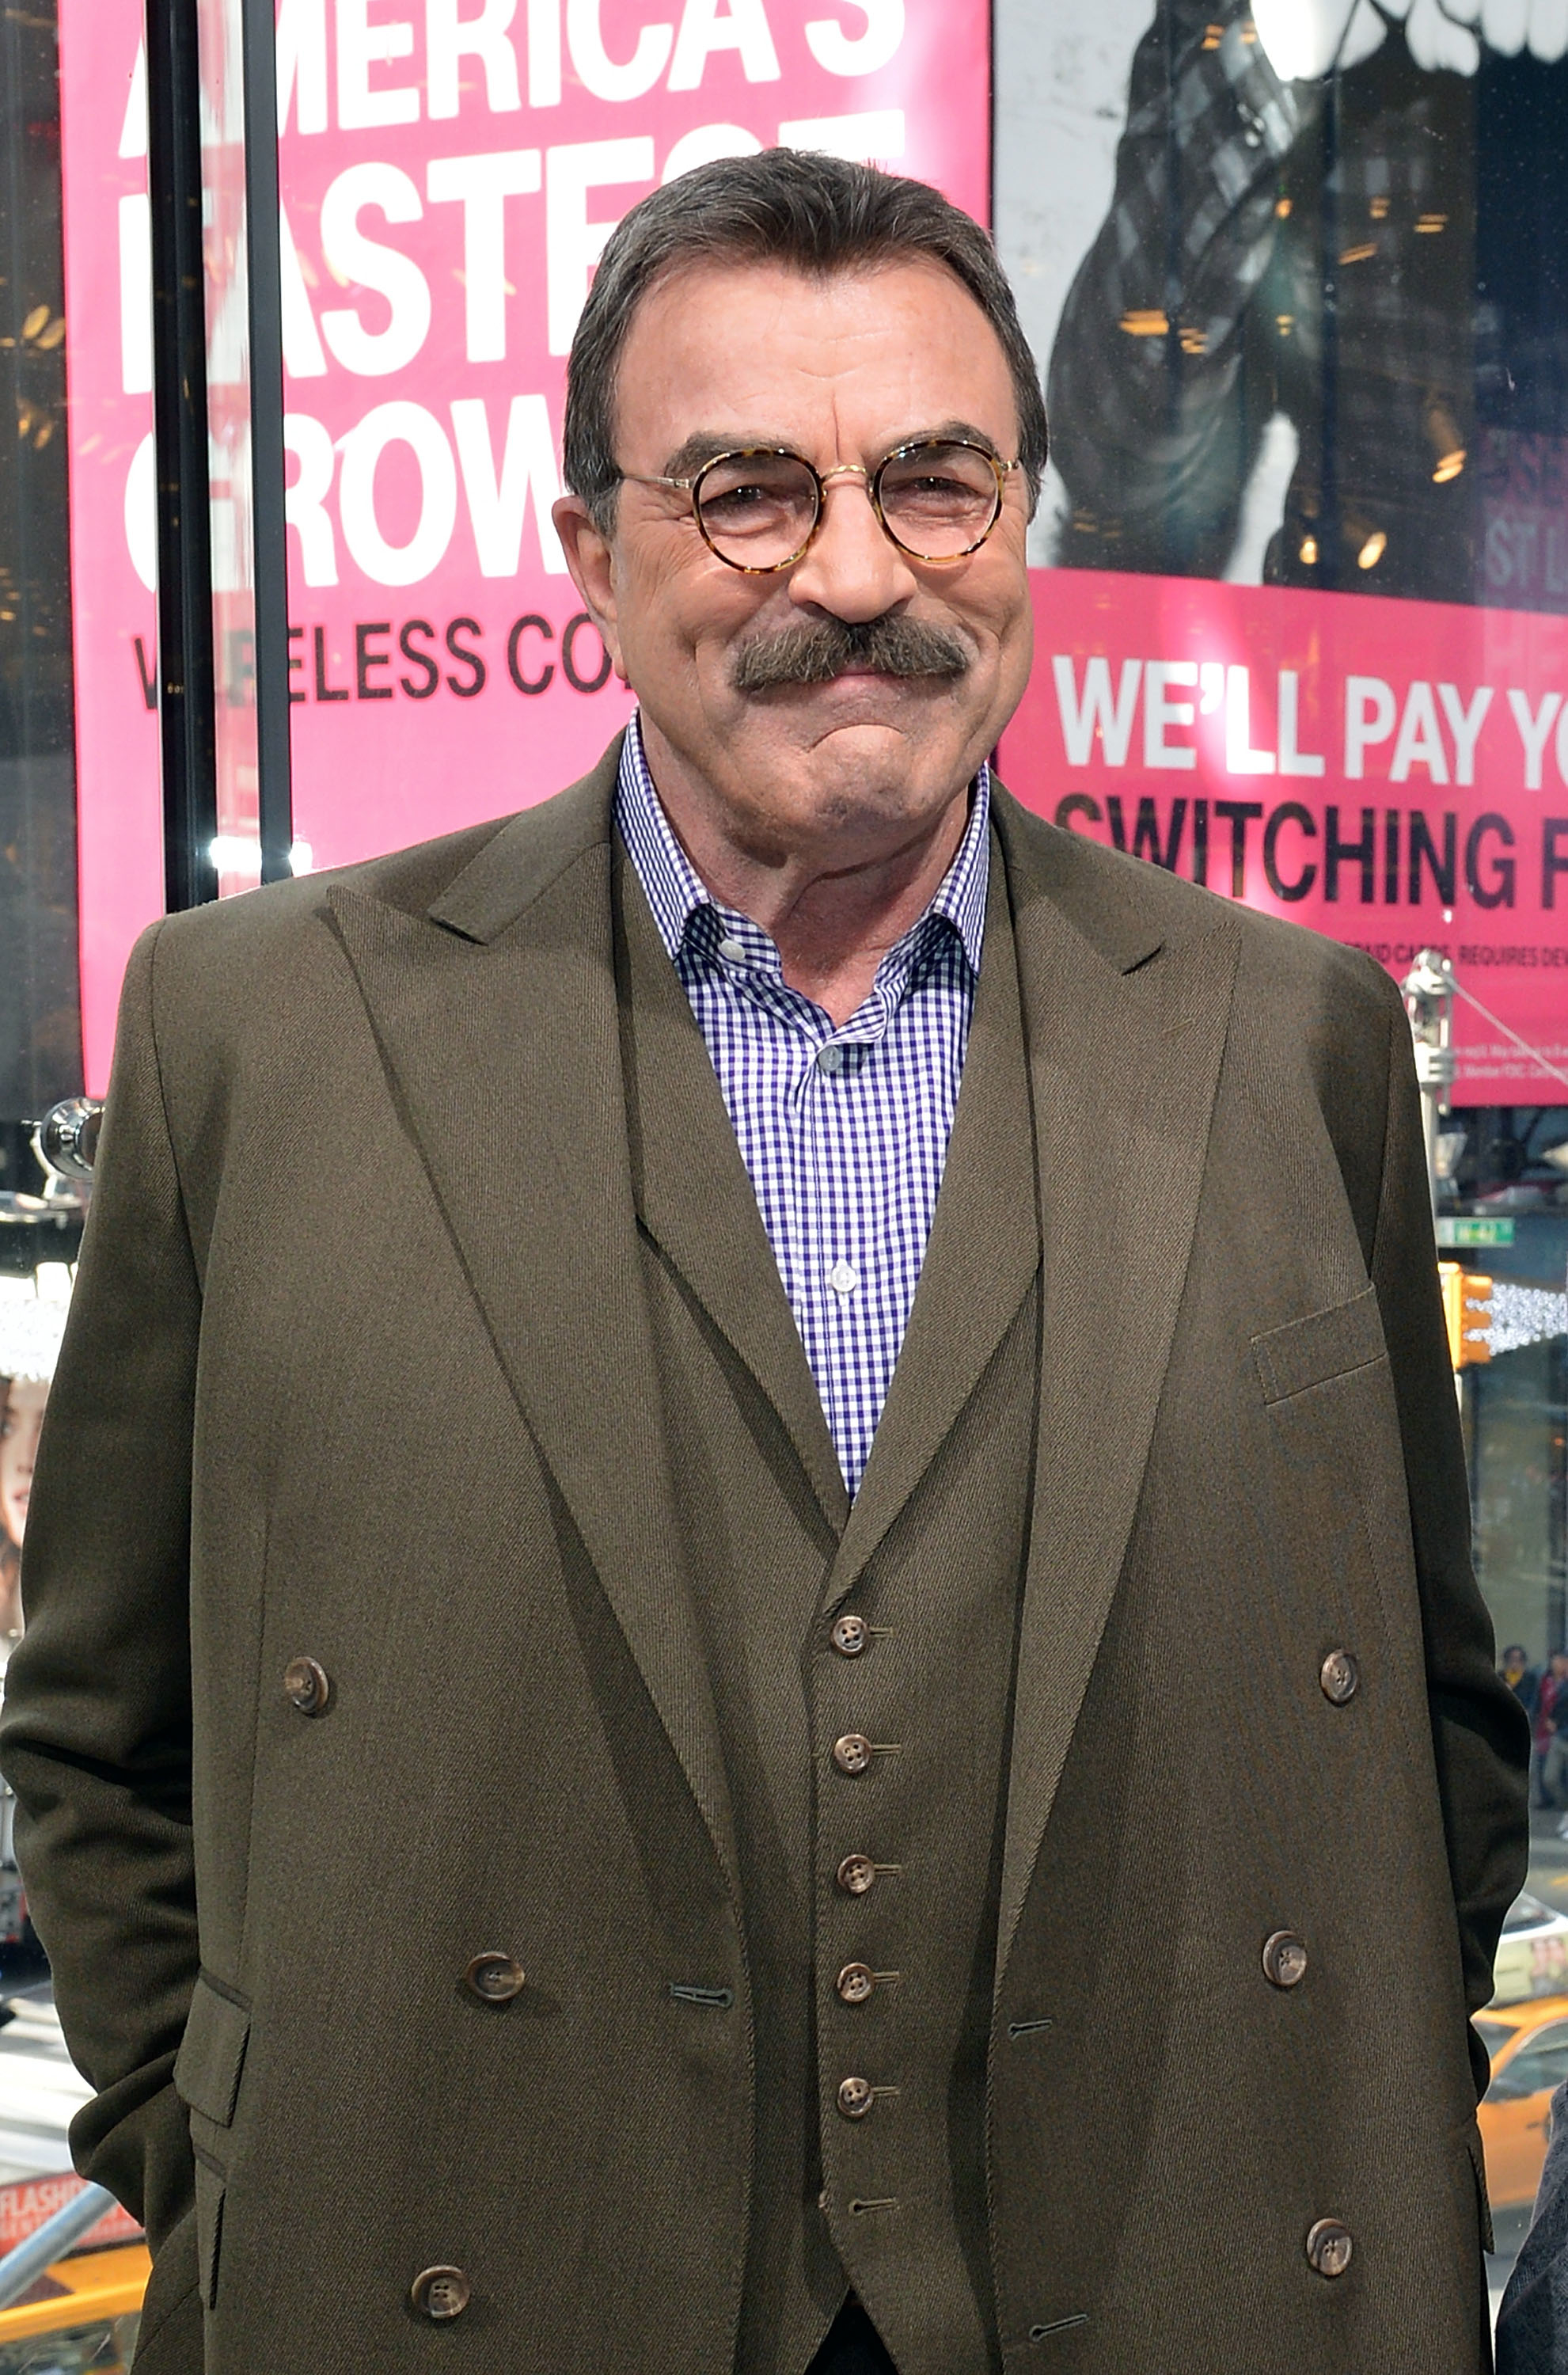 Tom Selleck in a double-breasted suit and checkered shirt at an event